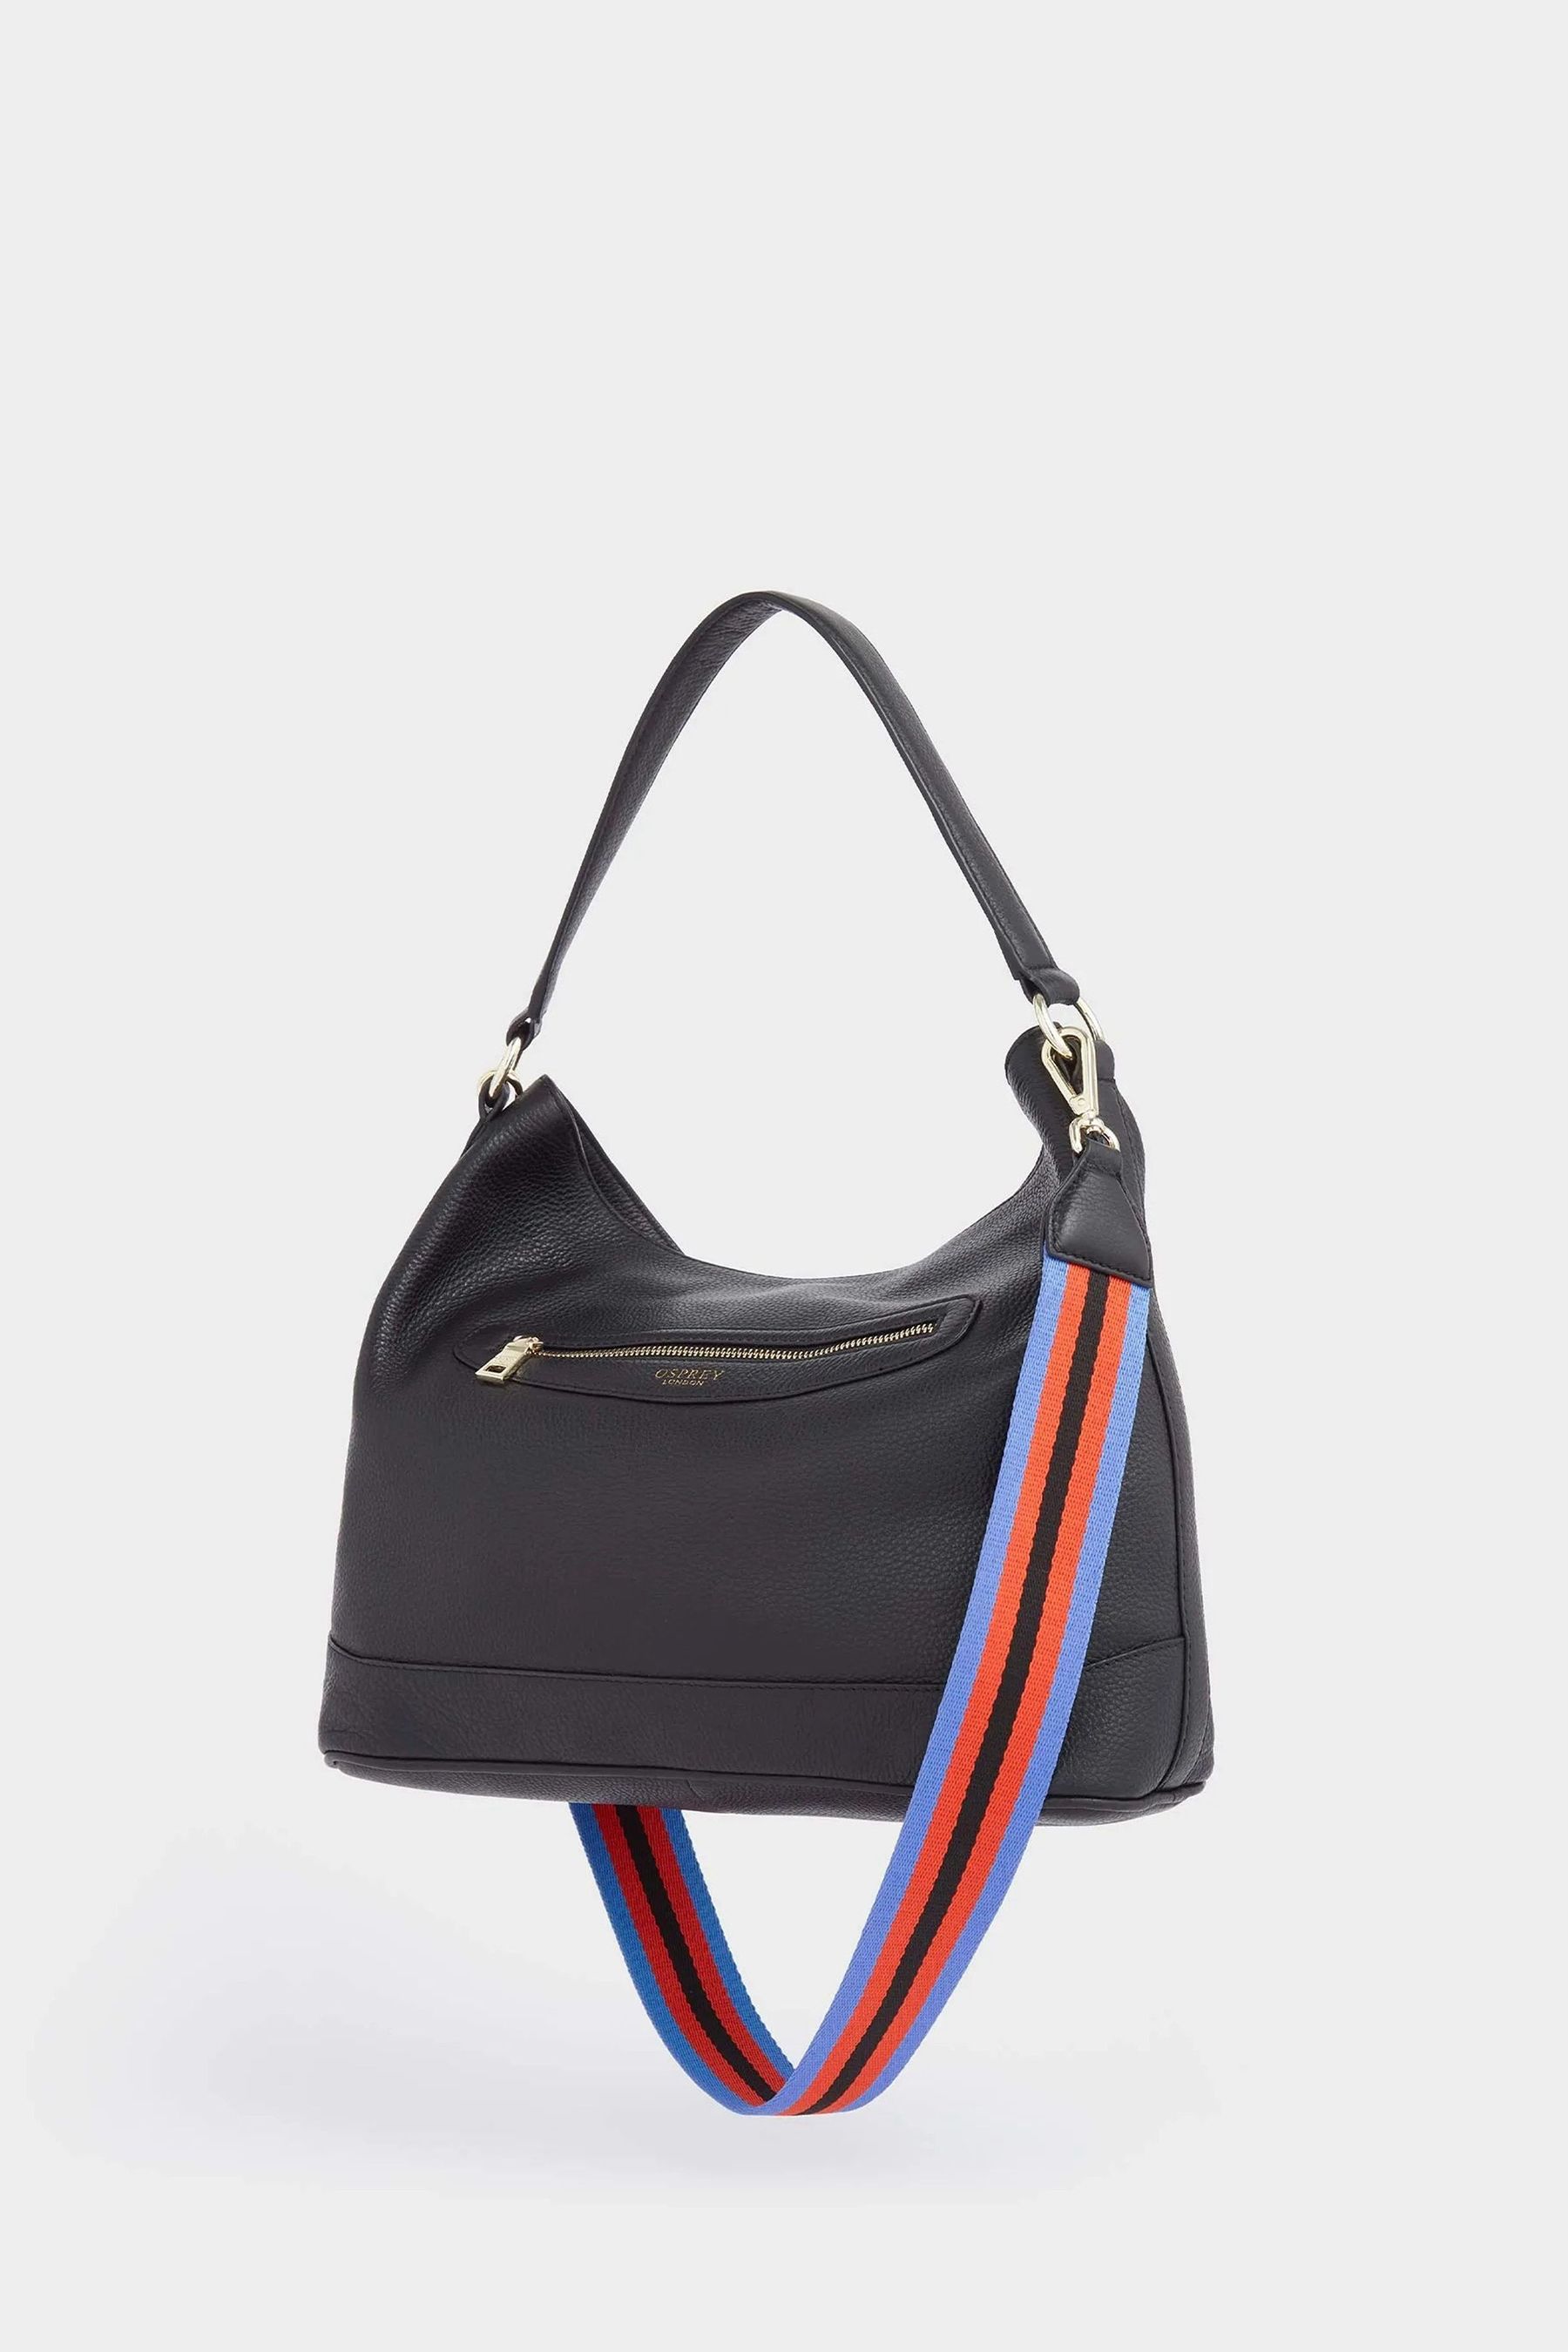 Buy OSPREY LONDON The Hendrix Leather Hobo Bag from the Next UK online shop